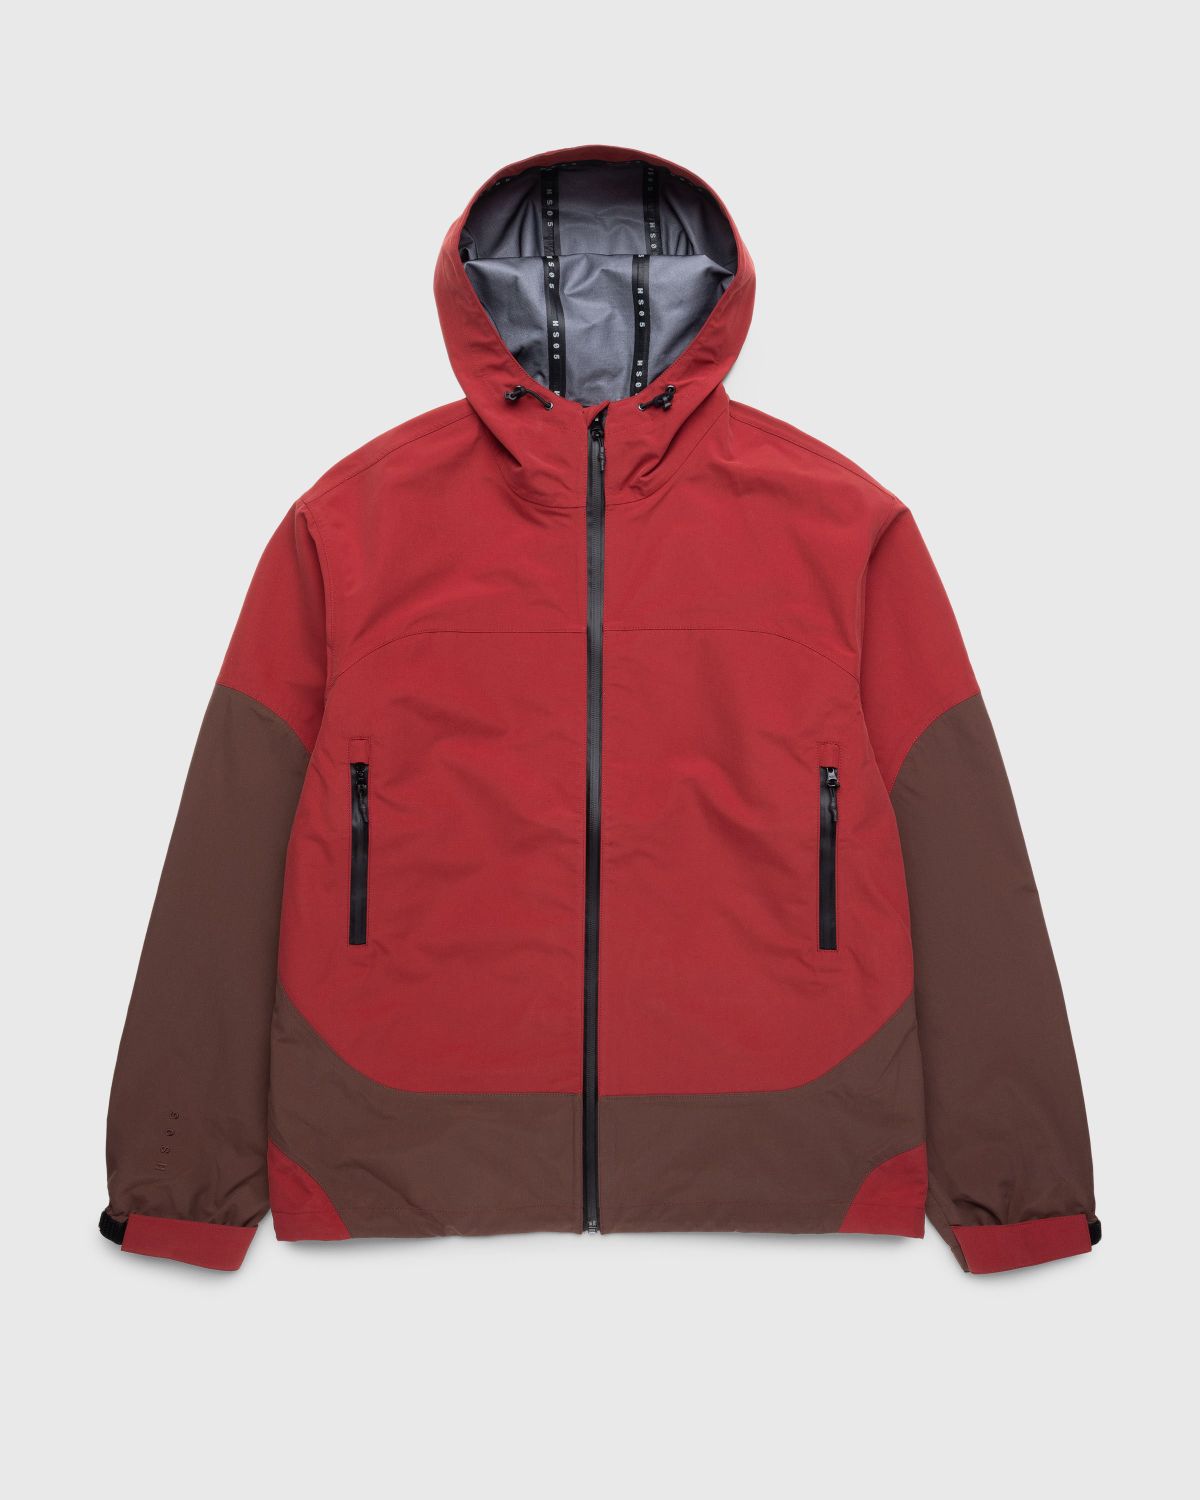 Highsnobiety HS05 – 3 Layer Taped Nylon Jacket Ruby - Outerwear - Red - Image 1